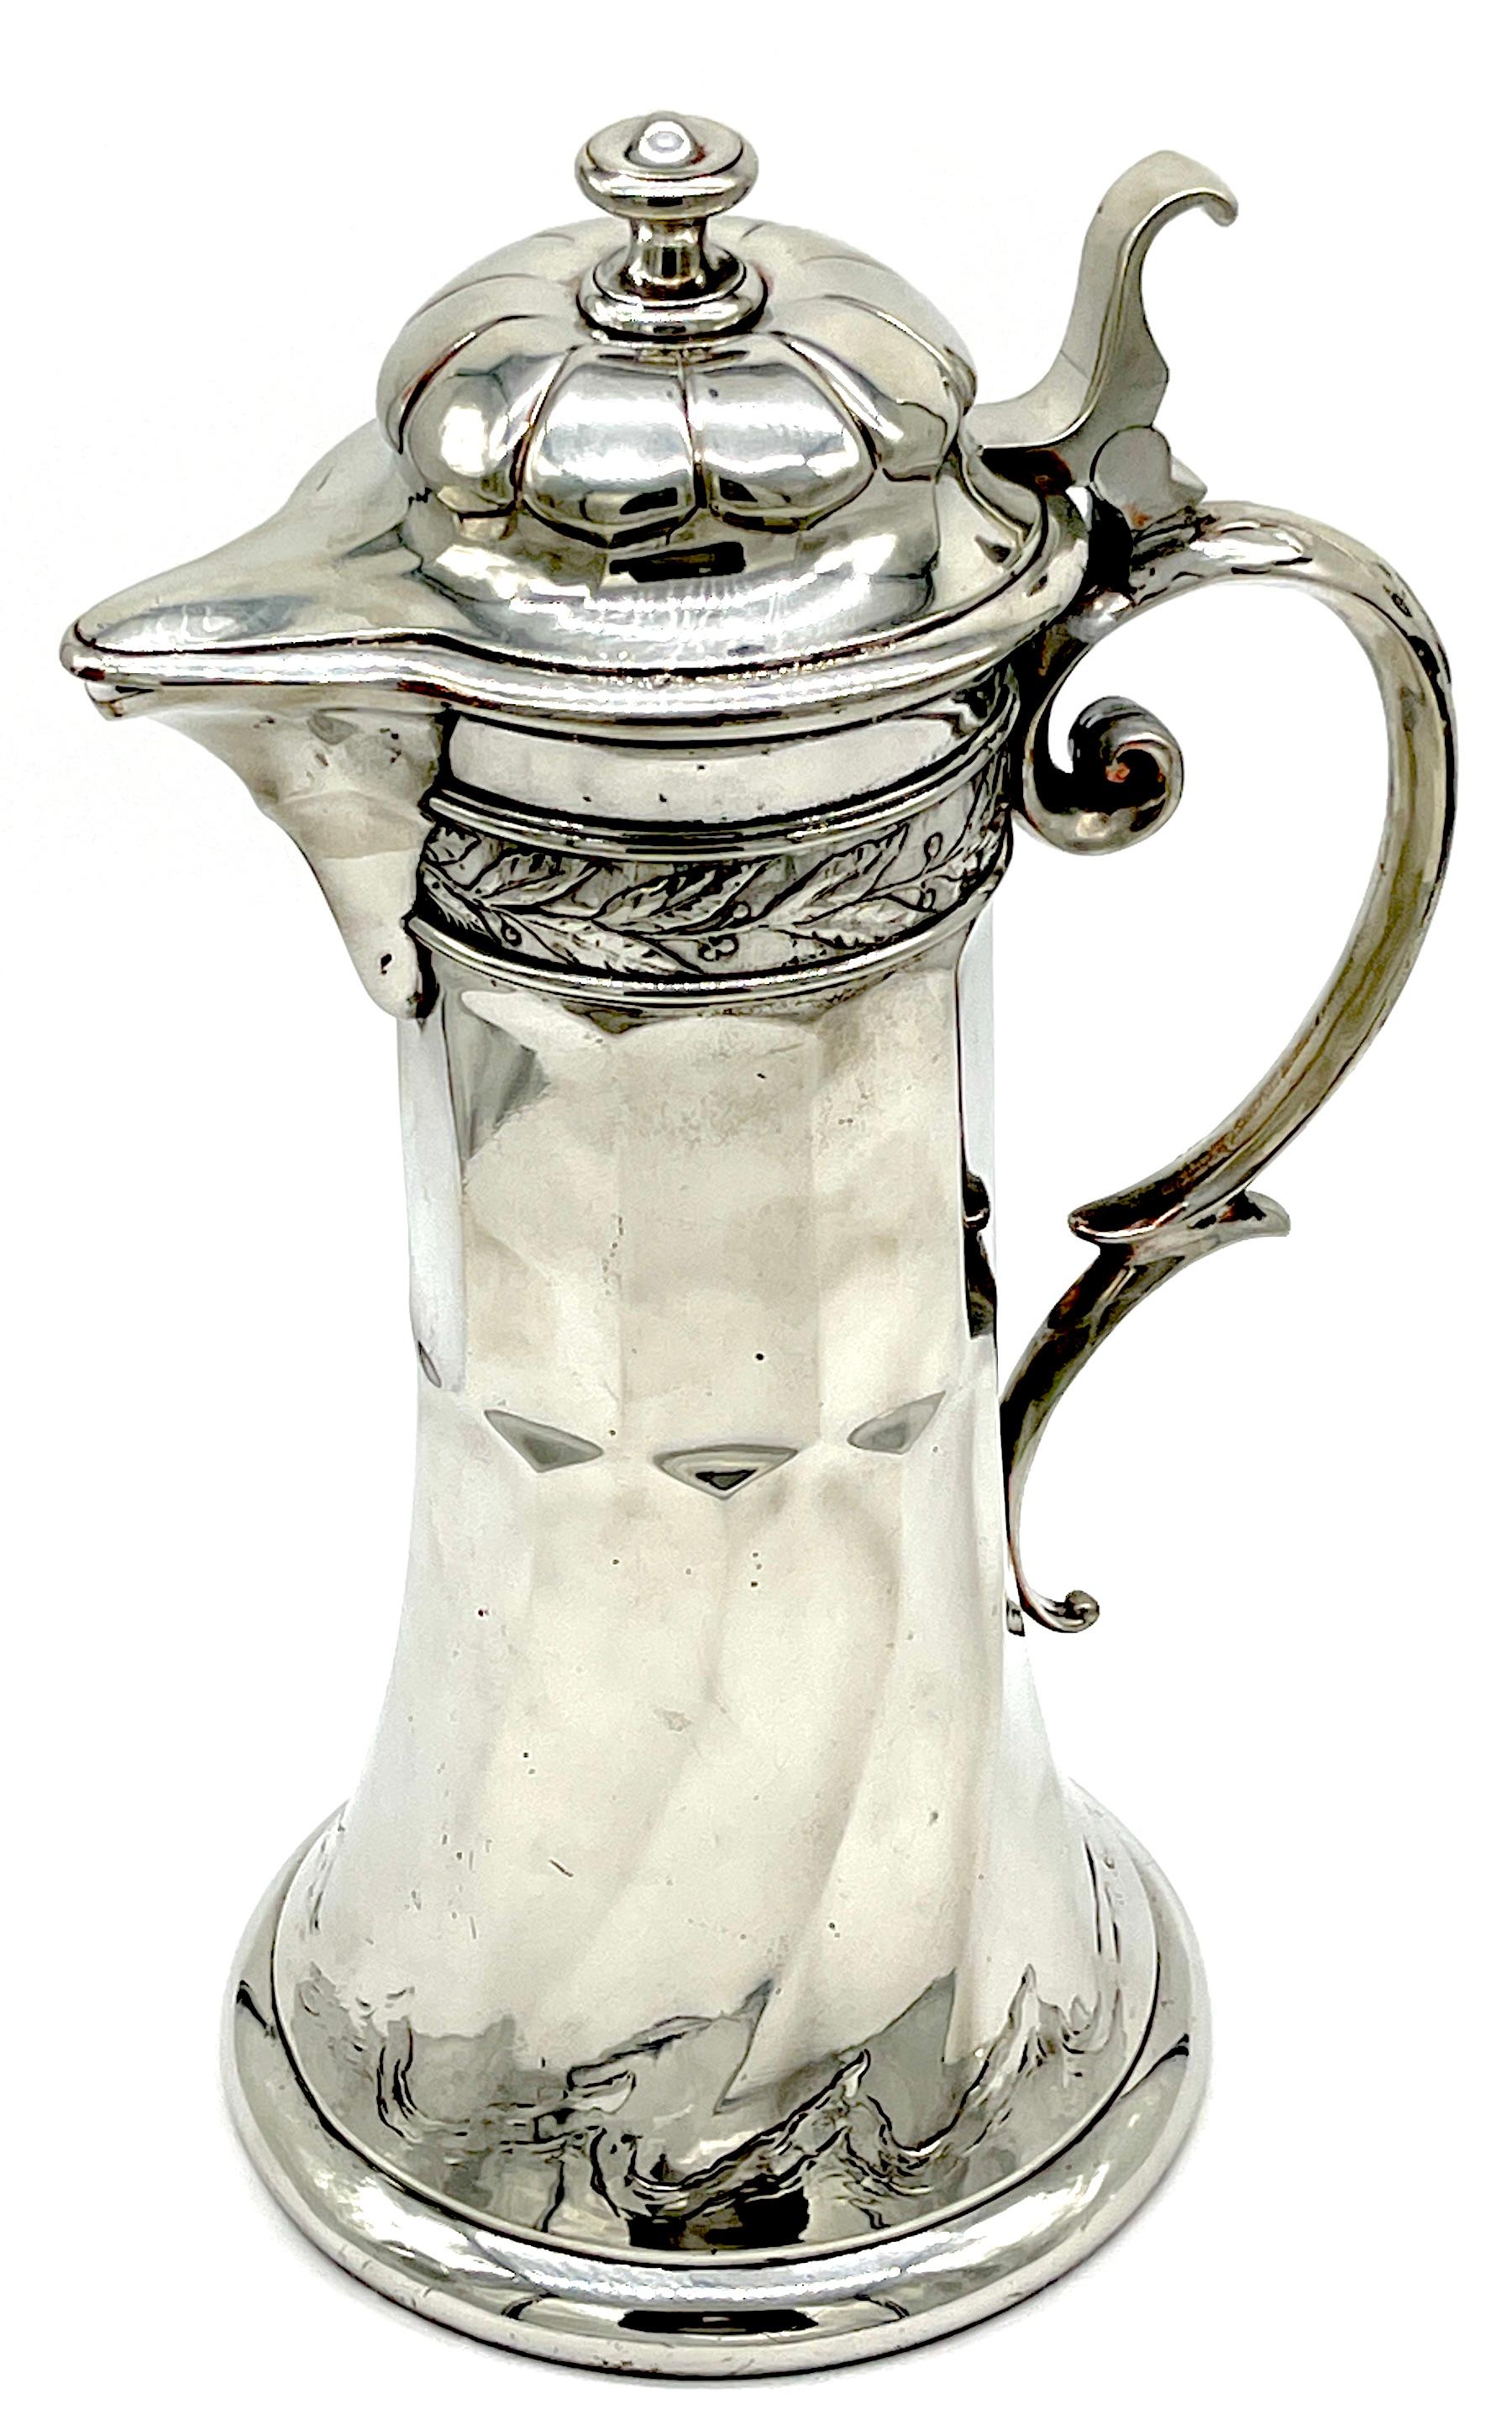 Art Nouveau 'Wave' Motif Silver on Copper Flagon by Kayserzinn
Germany, circa 1900s

This is a fine example of Art Nouveau with this exquisite 'Wave' motif silver on copper flagon by Kayserzinn. From Germany and dating back to the 1900s, this 